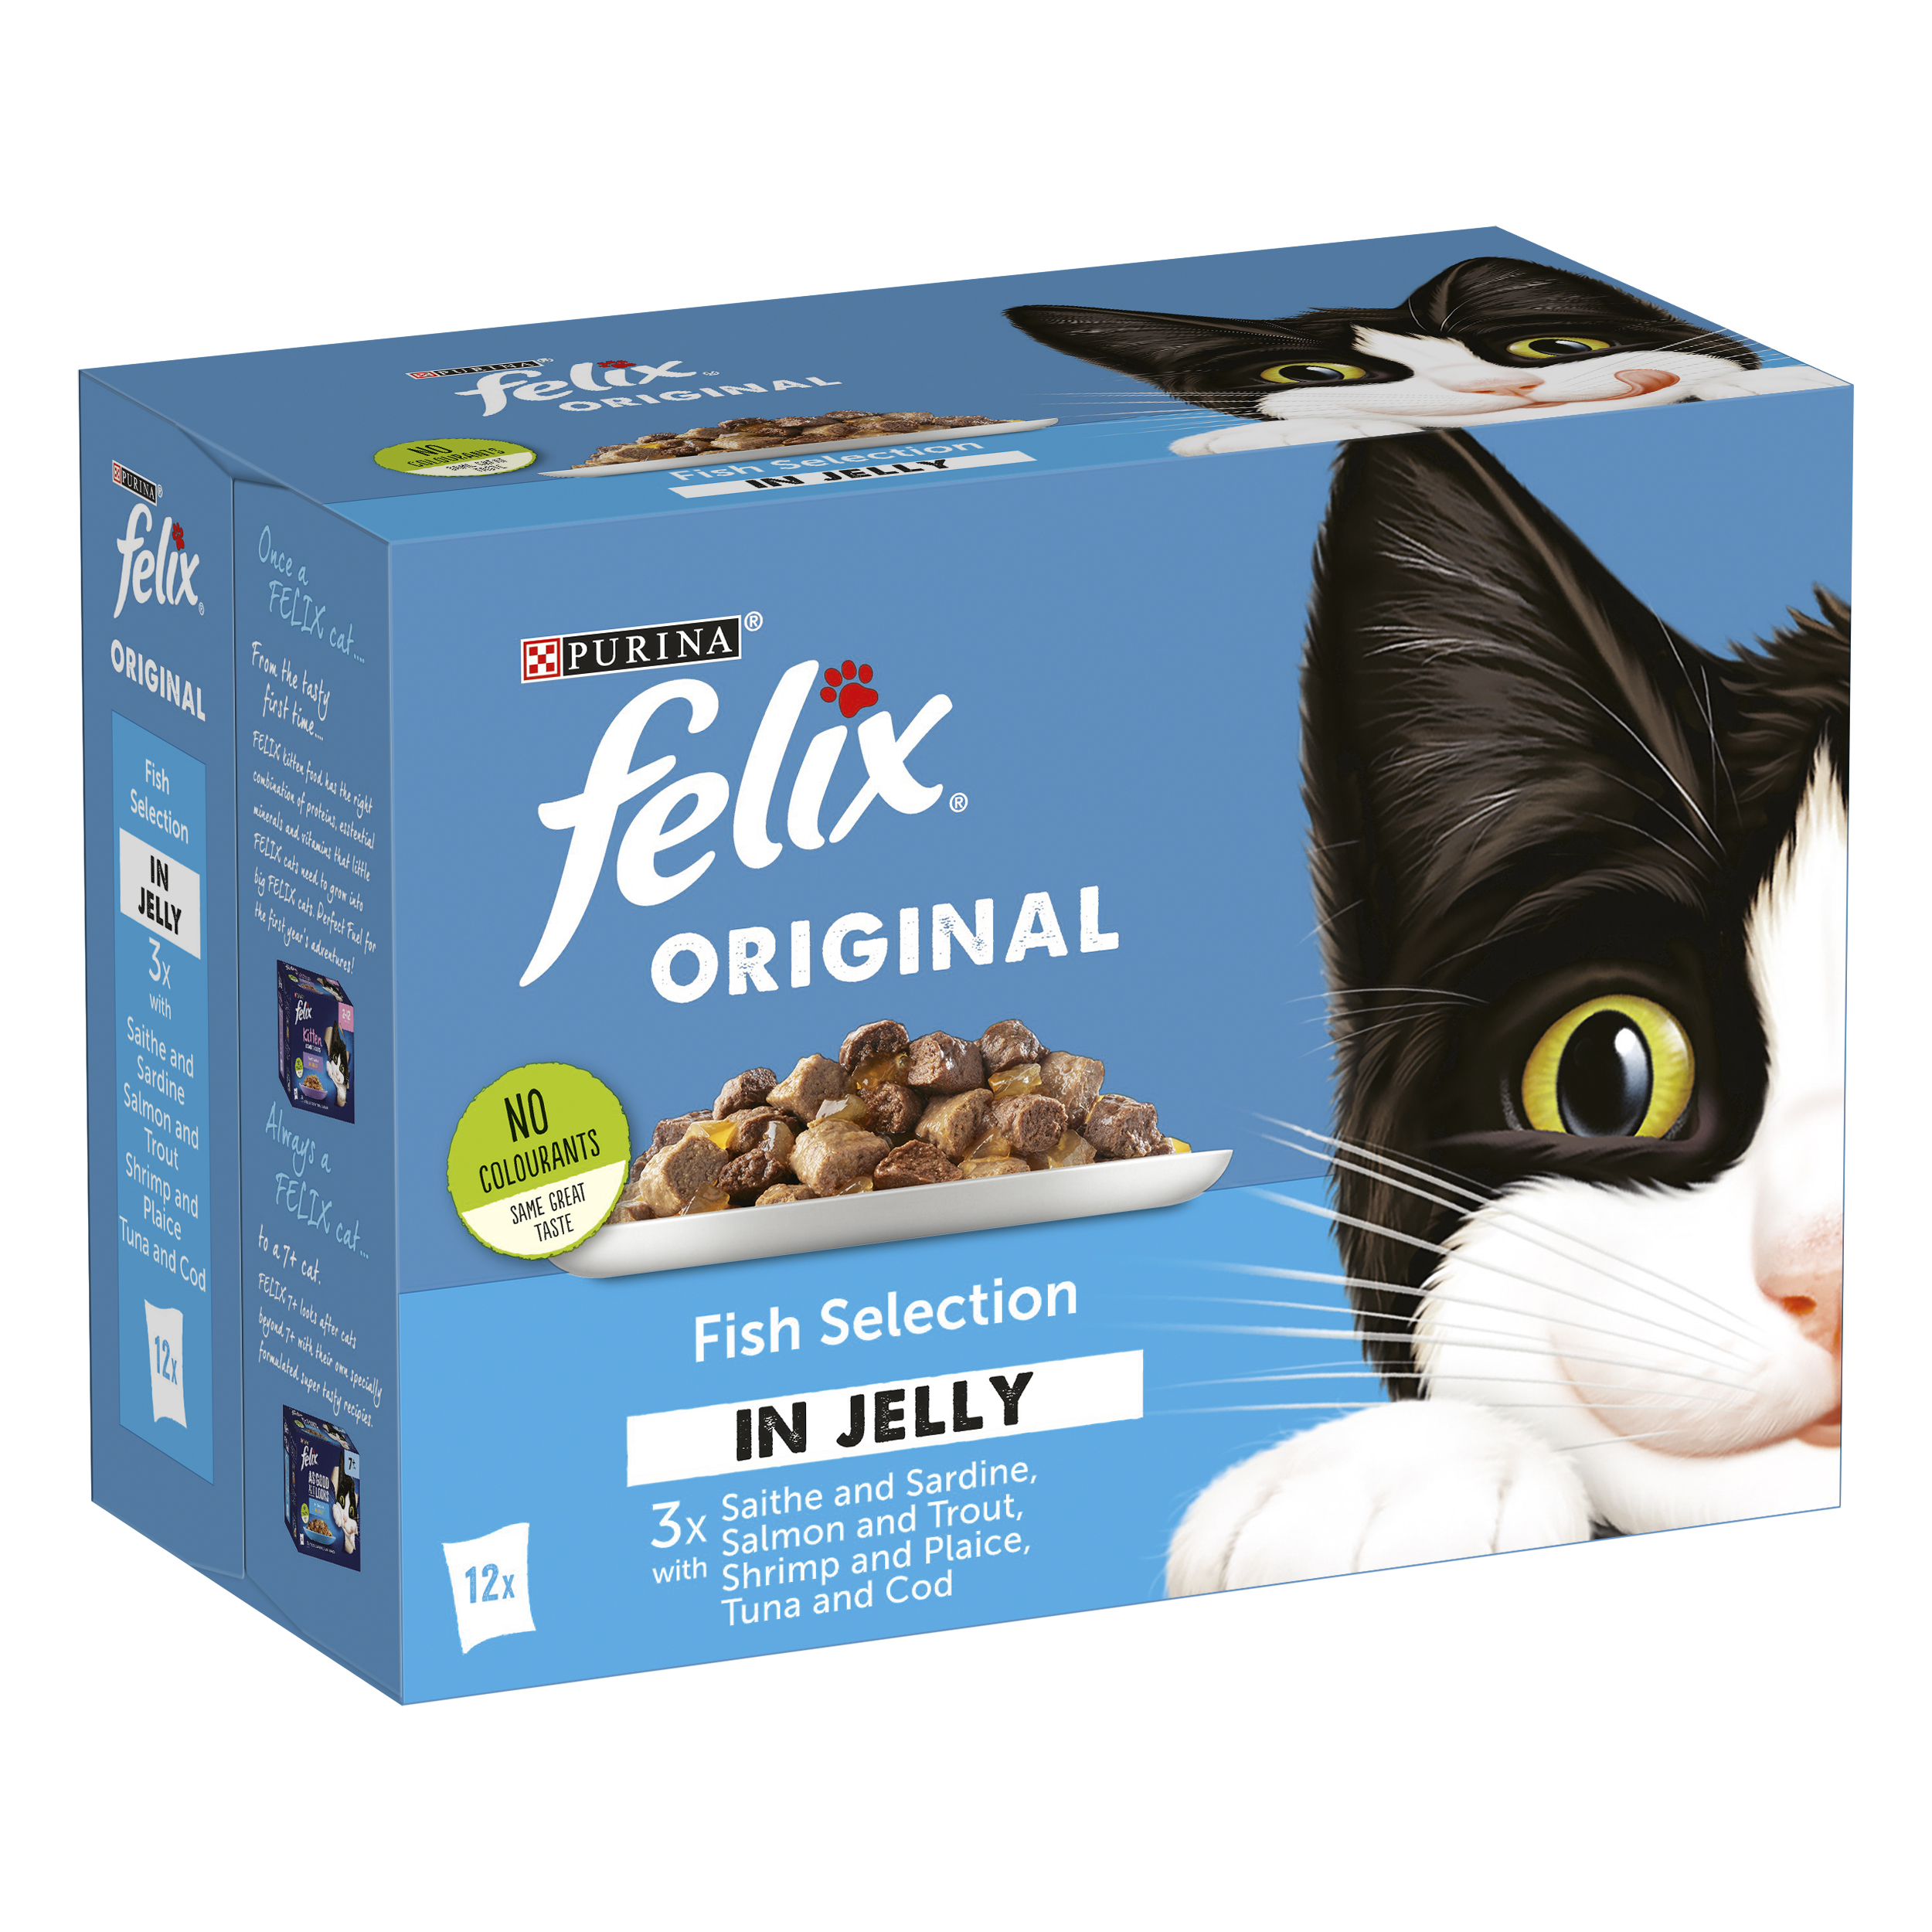 Purina Felix® Multipack Fish Selection in Jelly 100g, Pack of 12